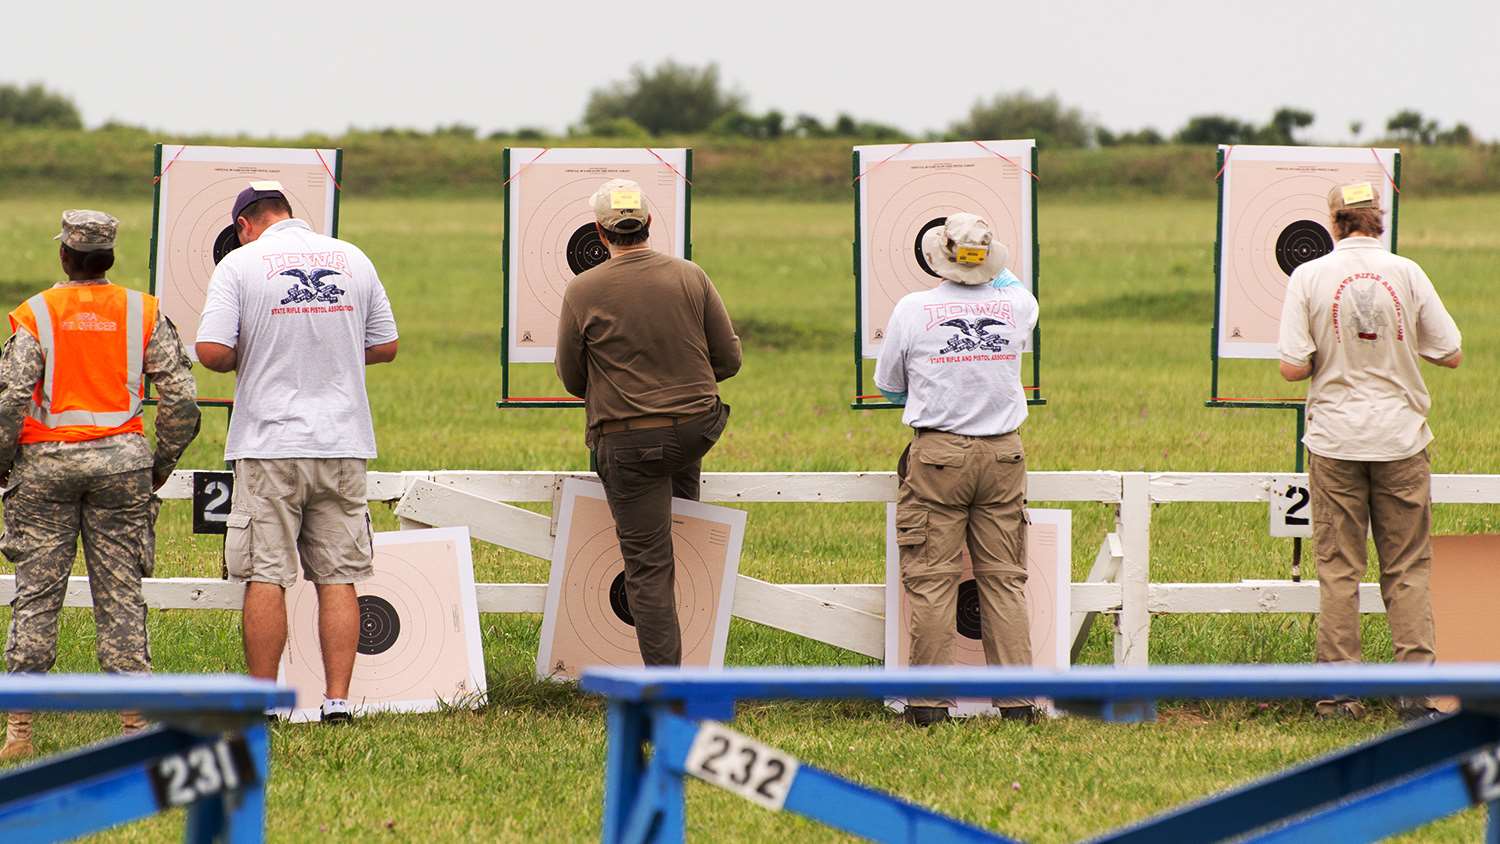 Scoring targets at the NRA Nationals, Camp Perry, Ohio